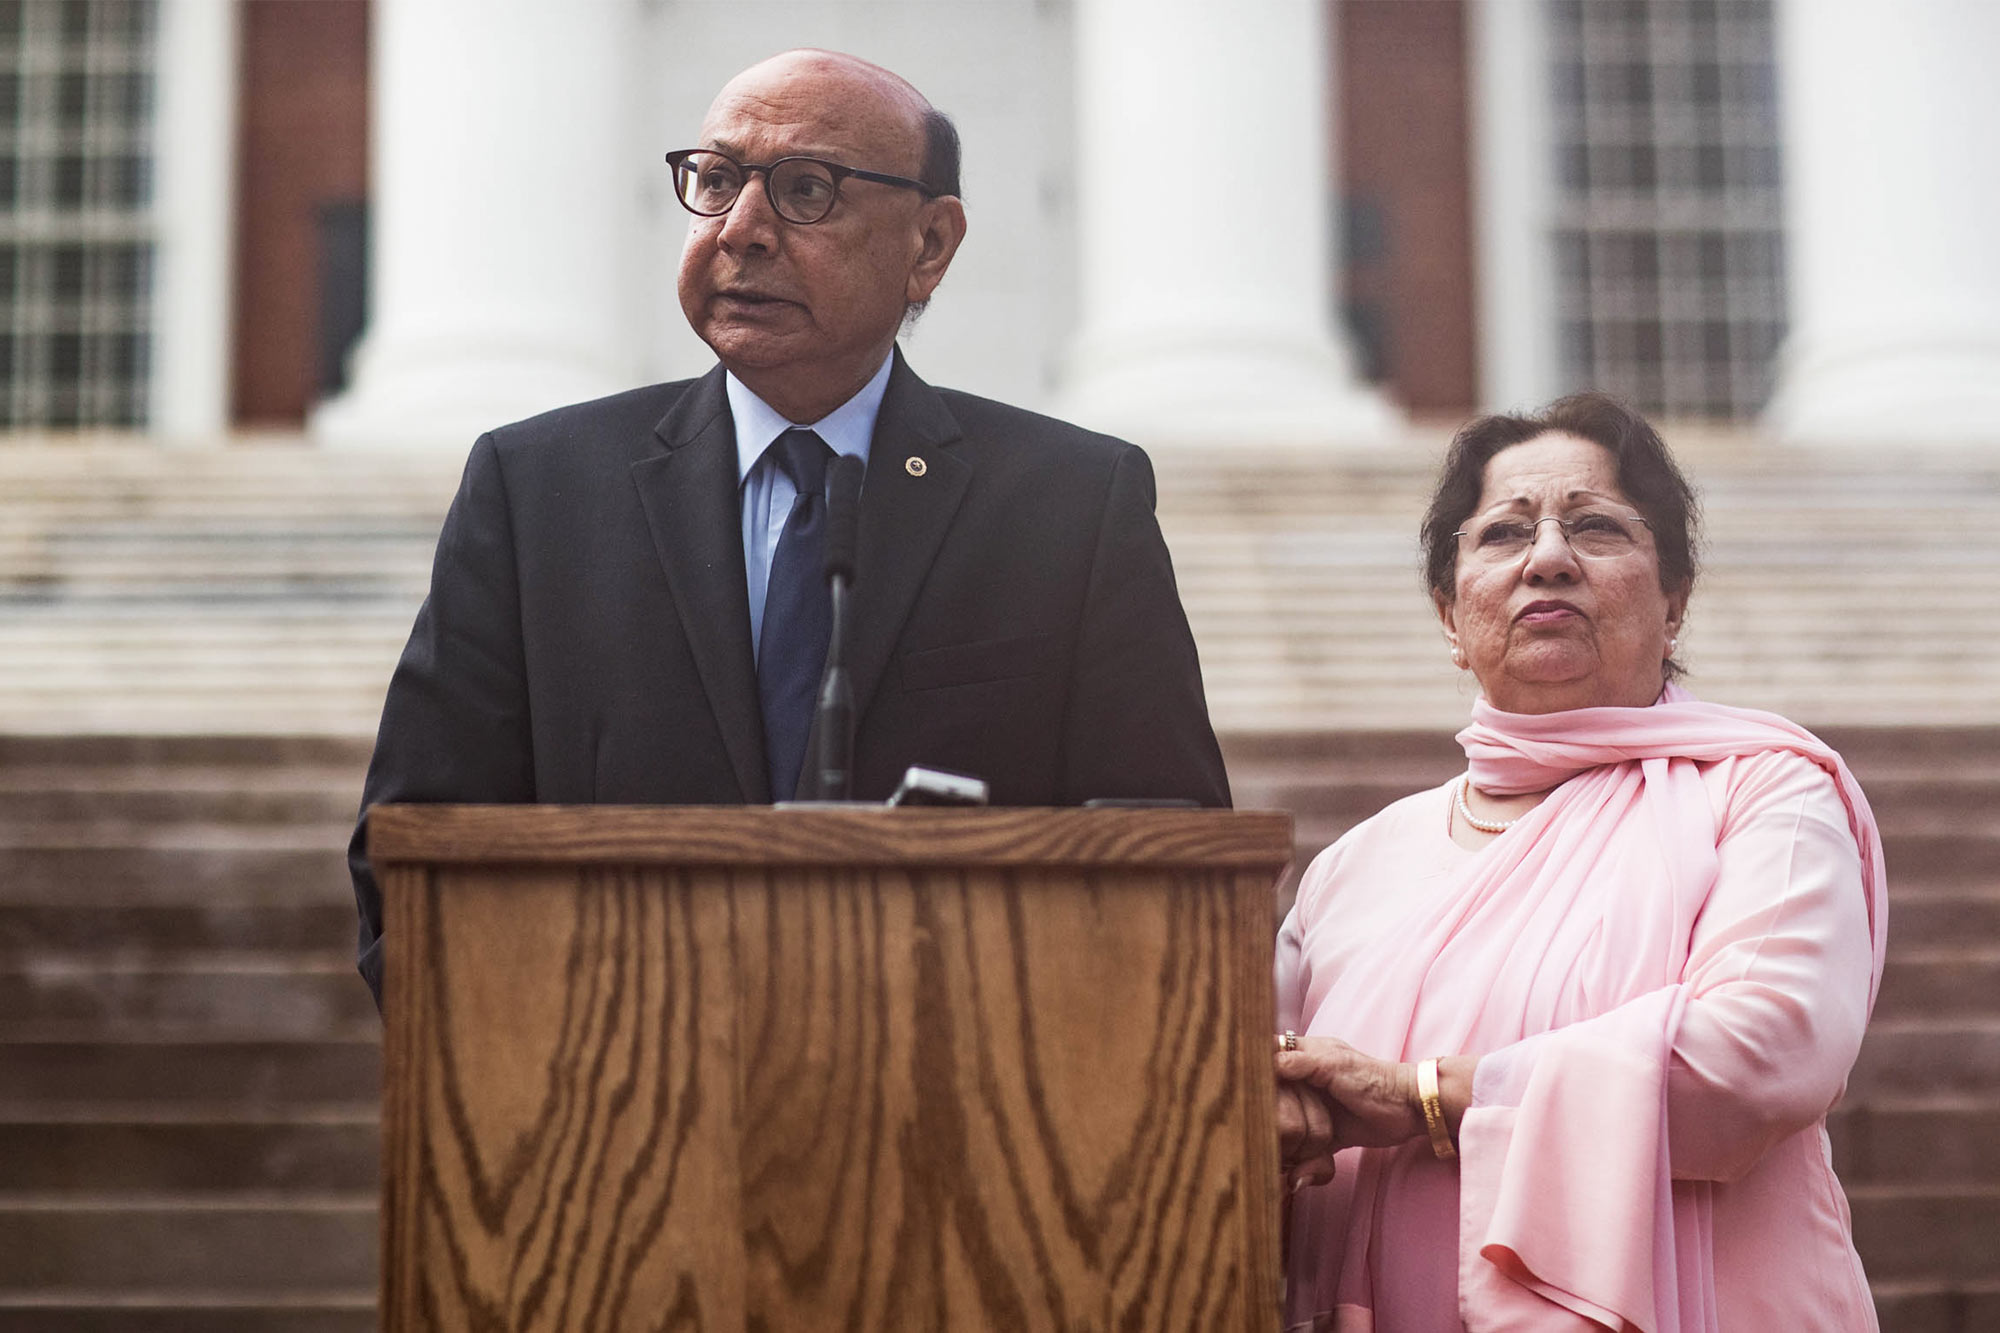 Khizr Khan stands at a podium in front of the UVA Rotunda. Ghazala Khan stands next to him.